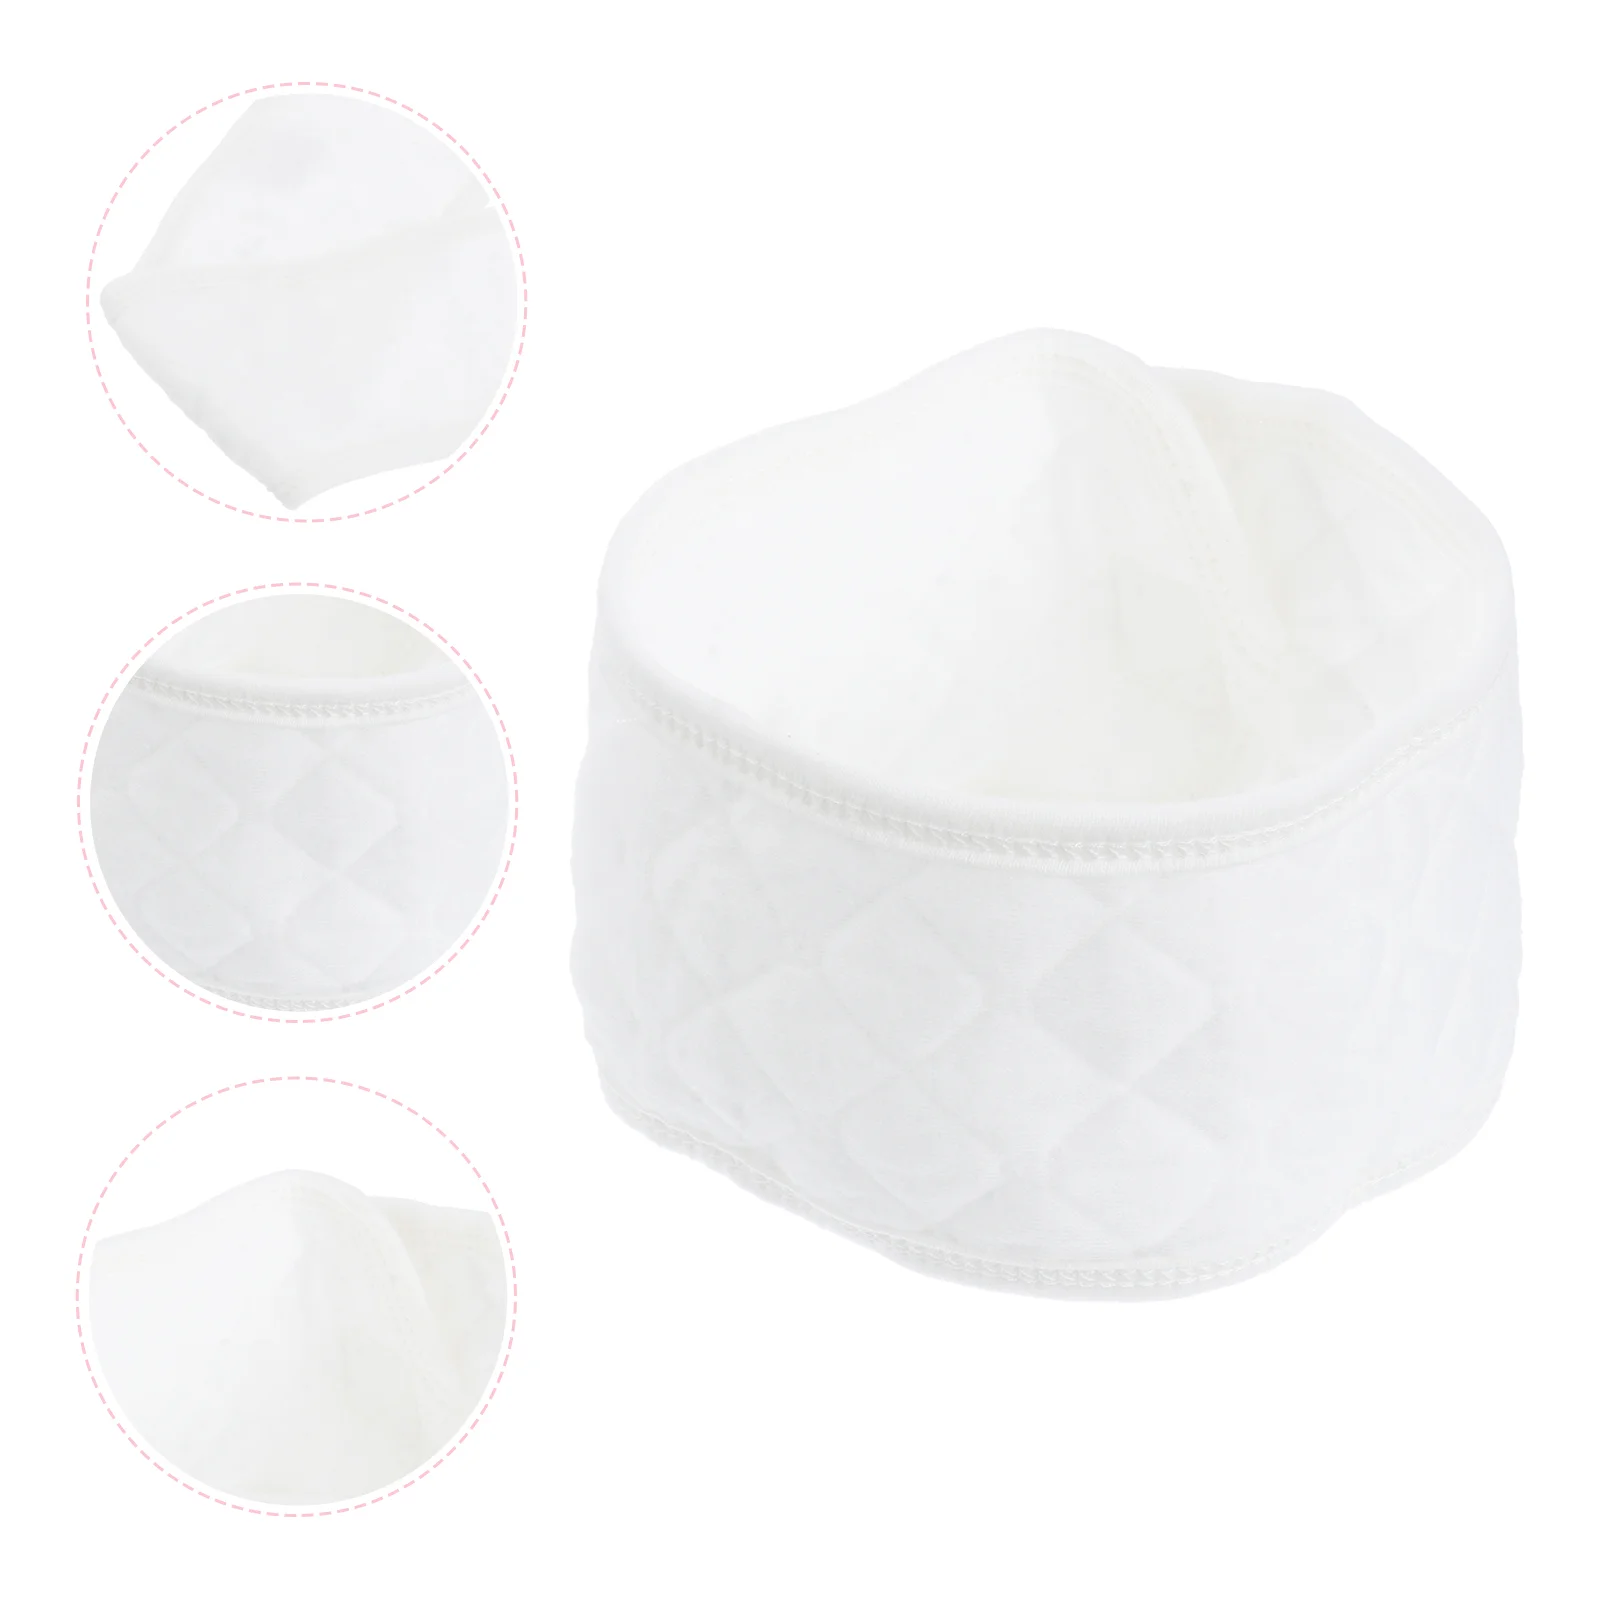 10 Pcs Newborn Umbilical Cord Infant Navel Belt Hernia Cotton Baby Belly Button Band 4pcs baby belly band infant umbilical belt newborn navel hernia truss beltbutton protector bellyband infant care navel guard